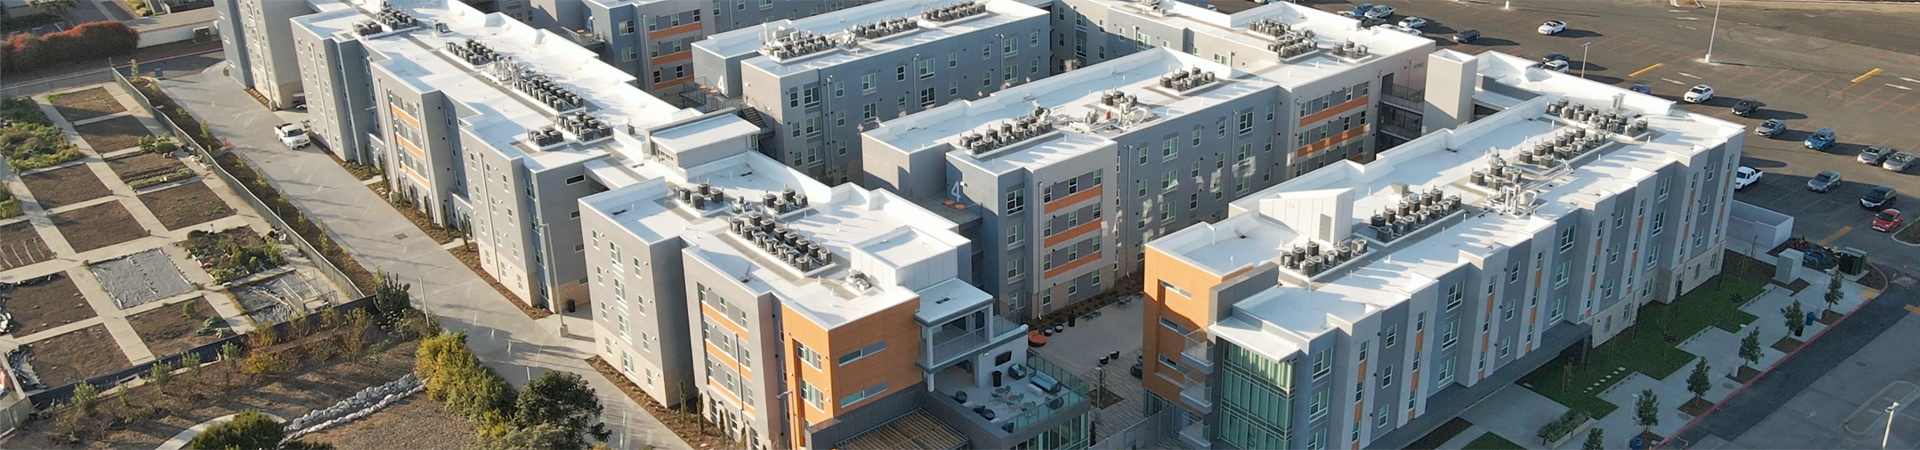 Aerial view of Student Housing